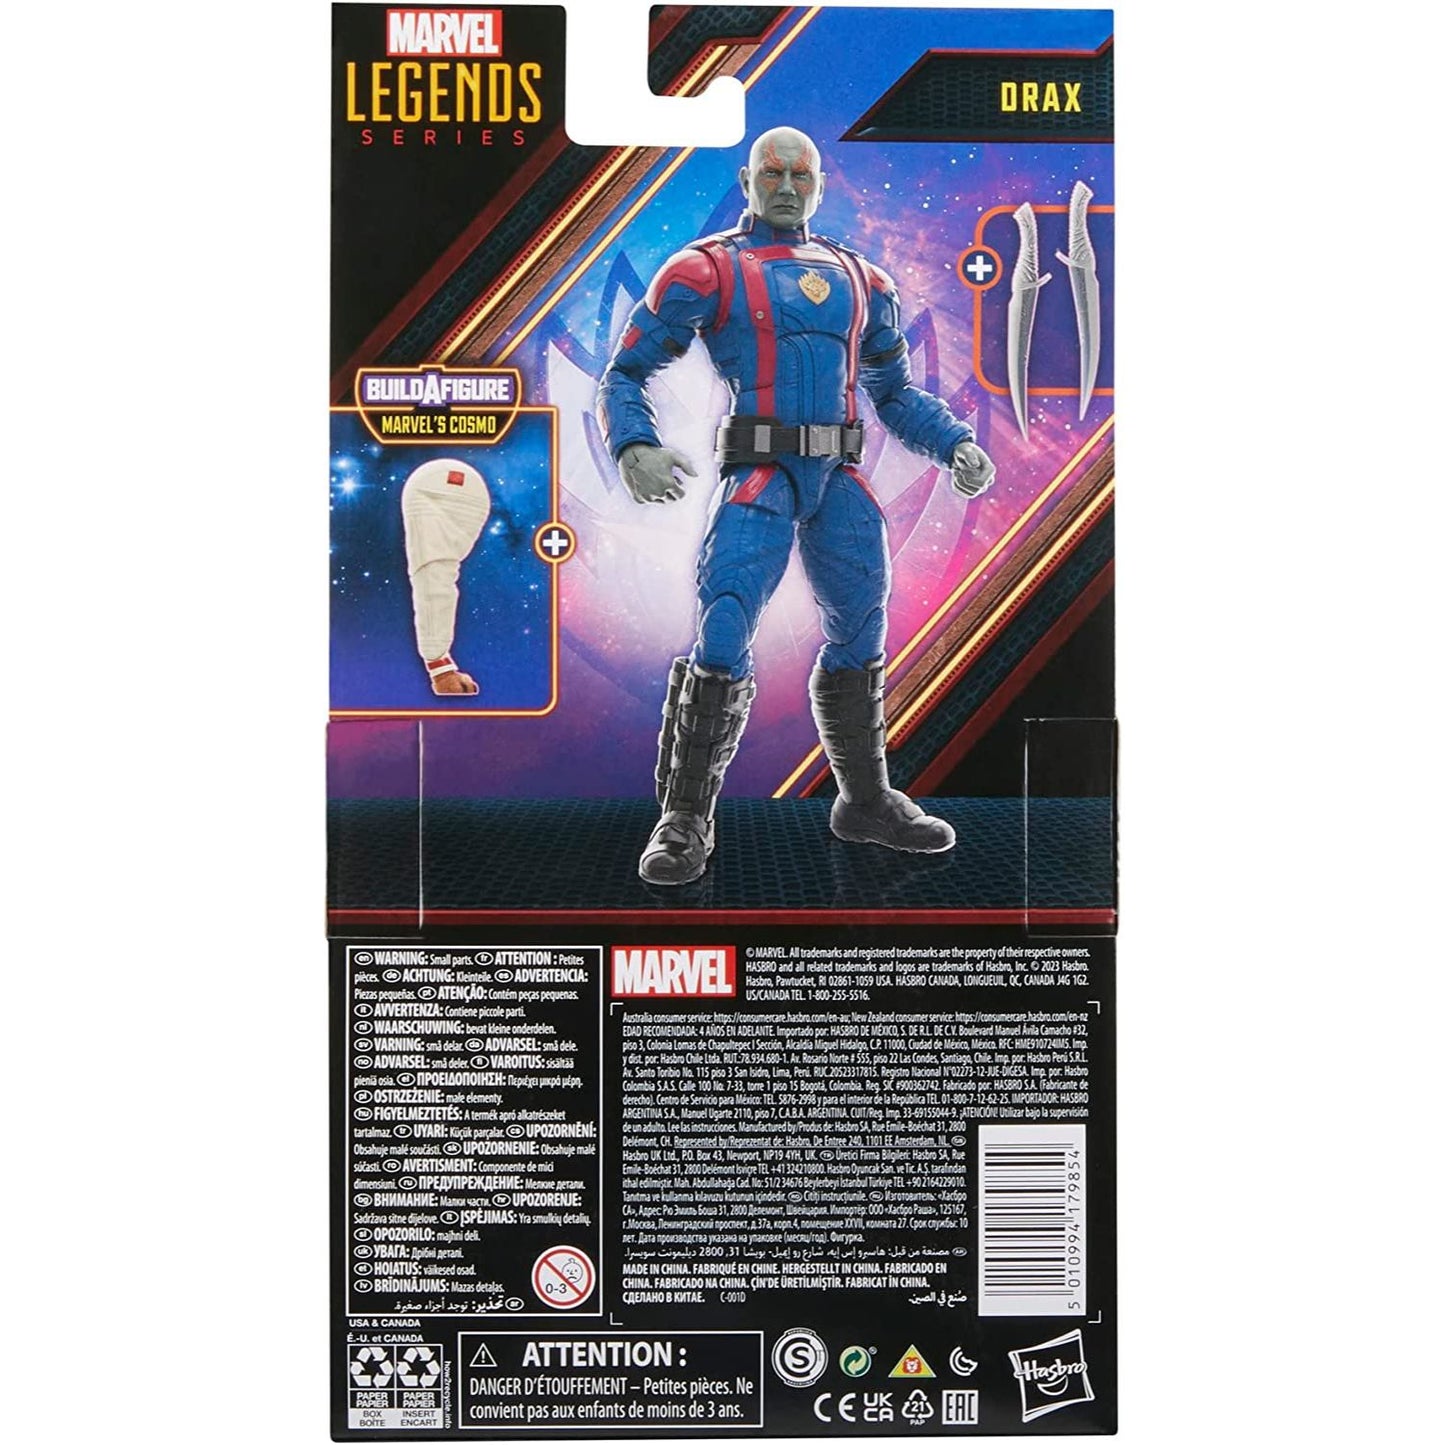 Guardians of the Galaxy Vol. 3 Marvel Legends Drax 6-Inch Action Figure Toy in a box back view - HERETOSERVEYOU